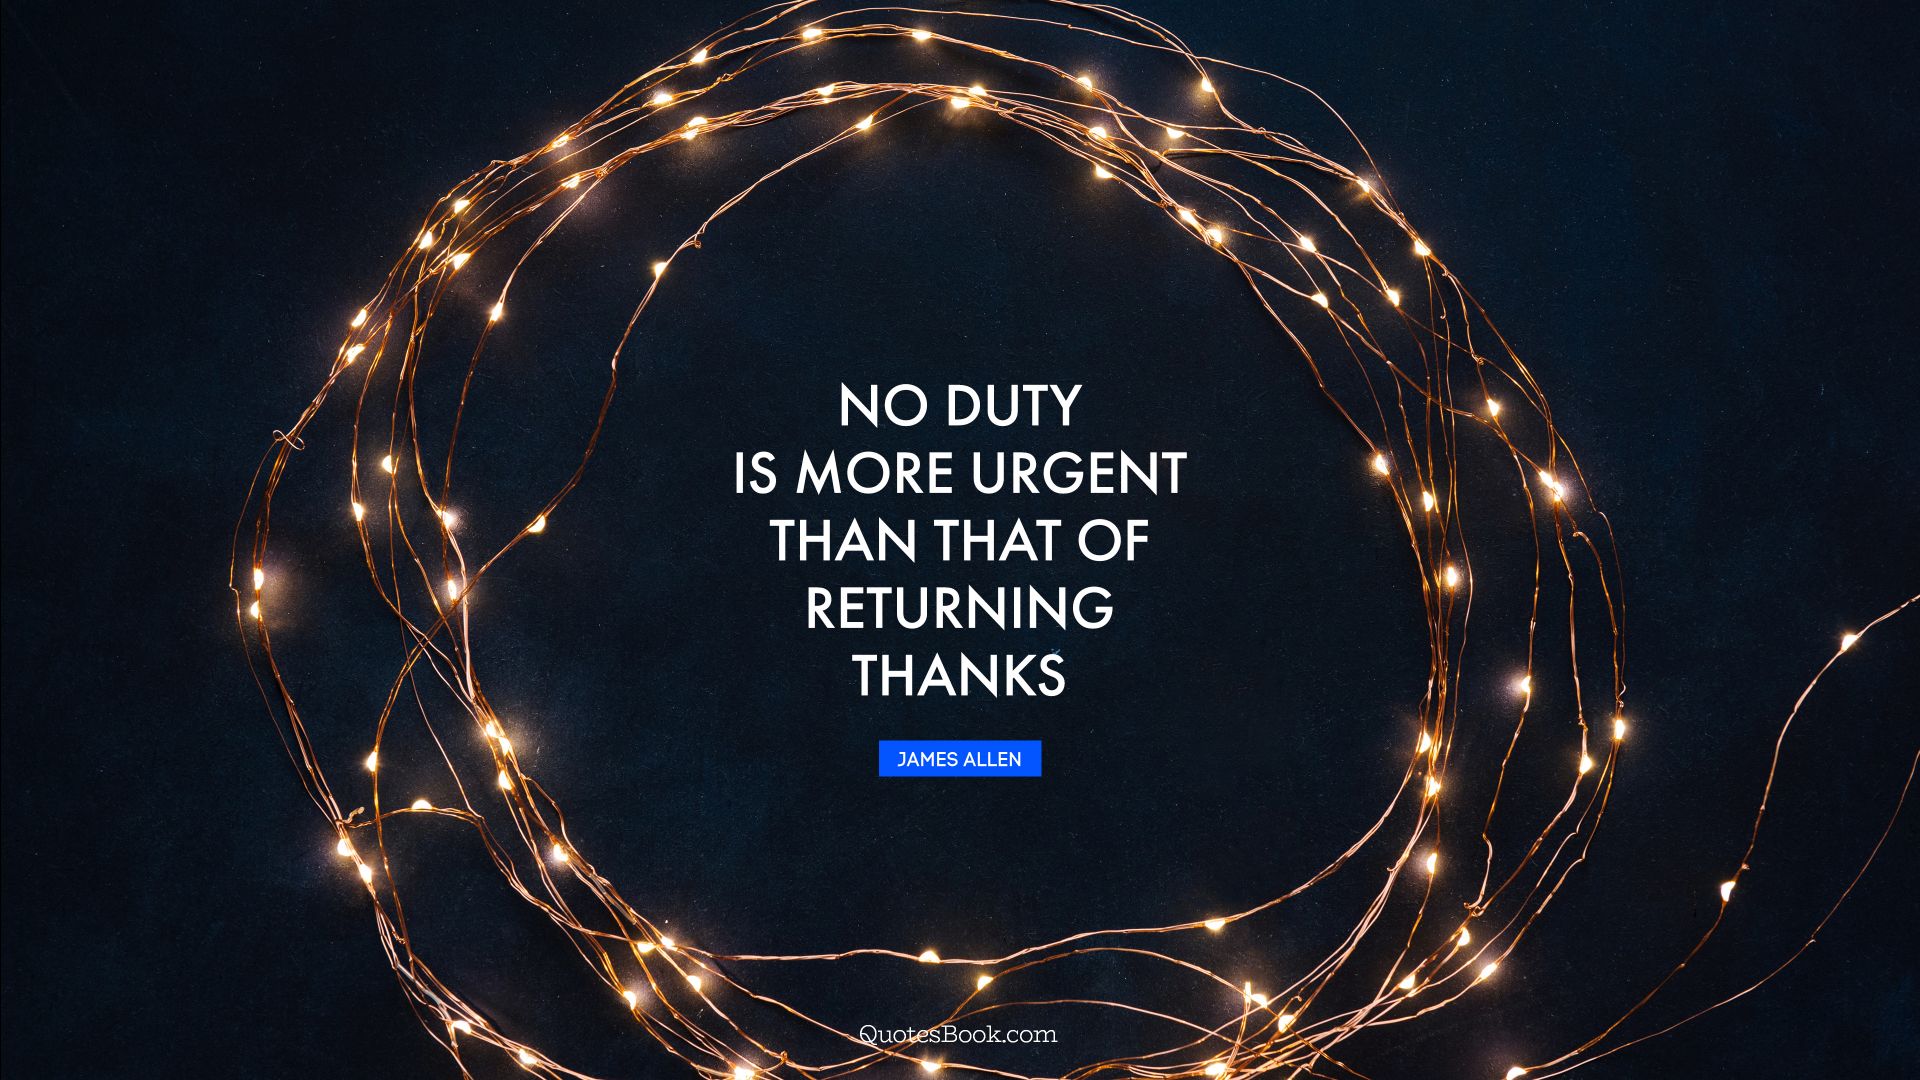 No duty is more urgent than that of returning thanks. - Quote by James Allen